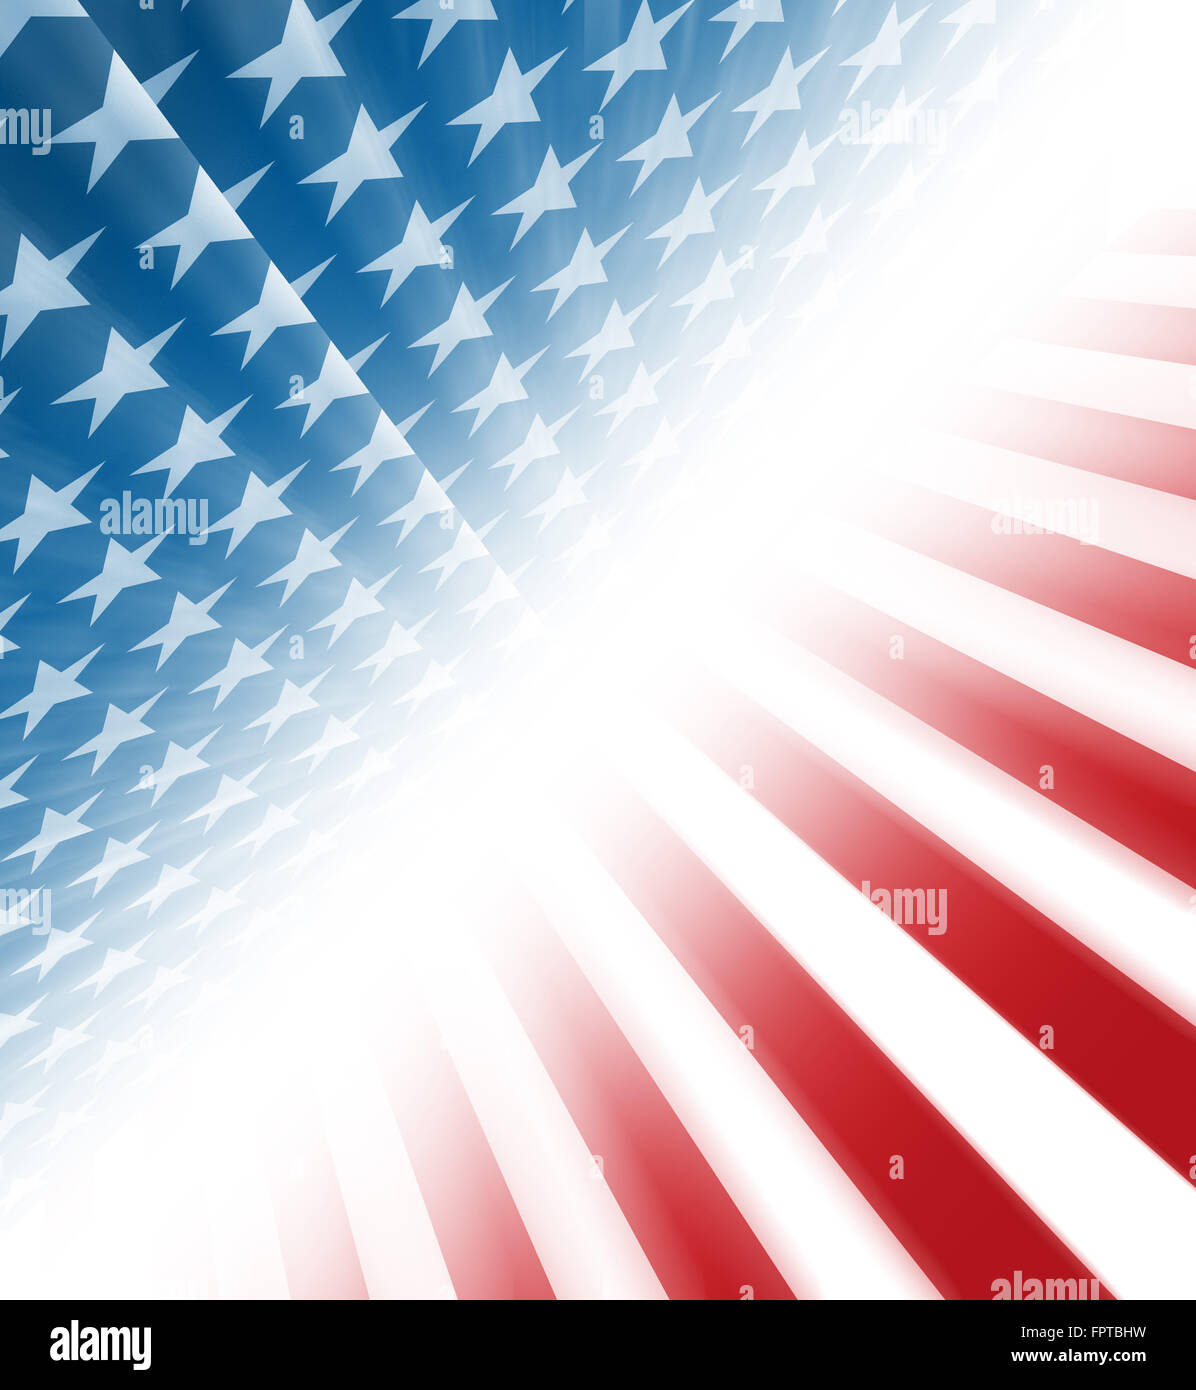 American stars and stripes coming from a perspective on a diagonal Stock Photo